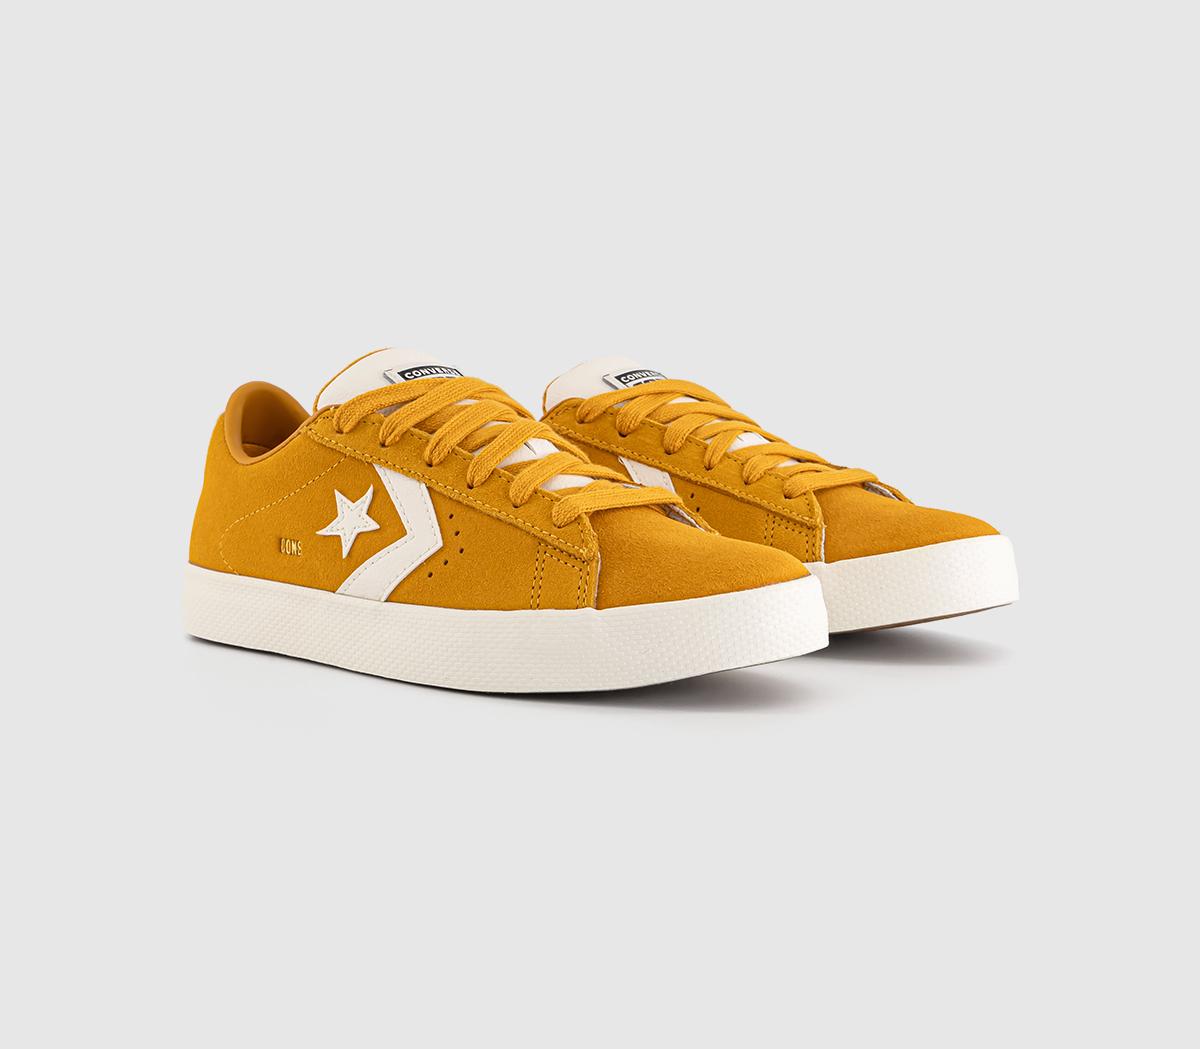 Converse Womens Pl Vulc Pro Ox Trainers Sunflower Gold Egret Yellow, 7.5